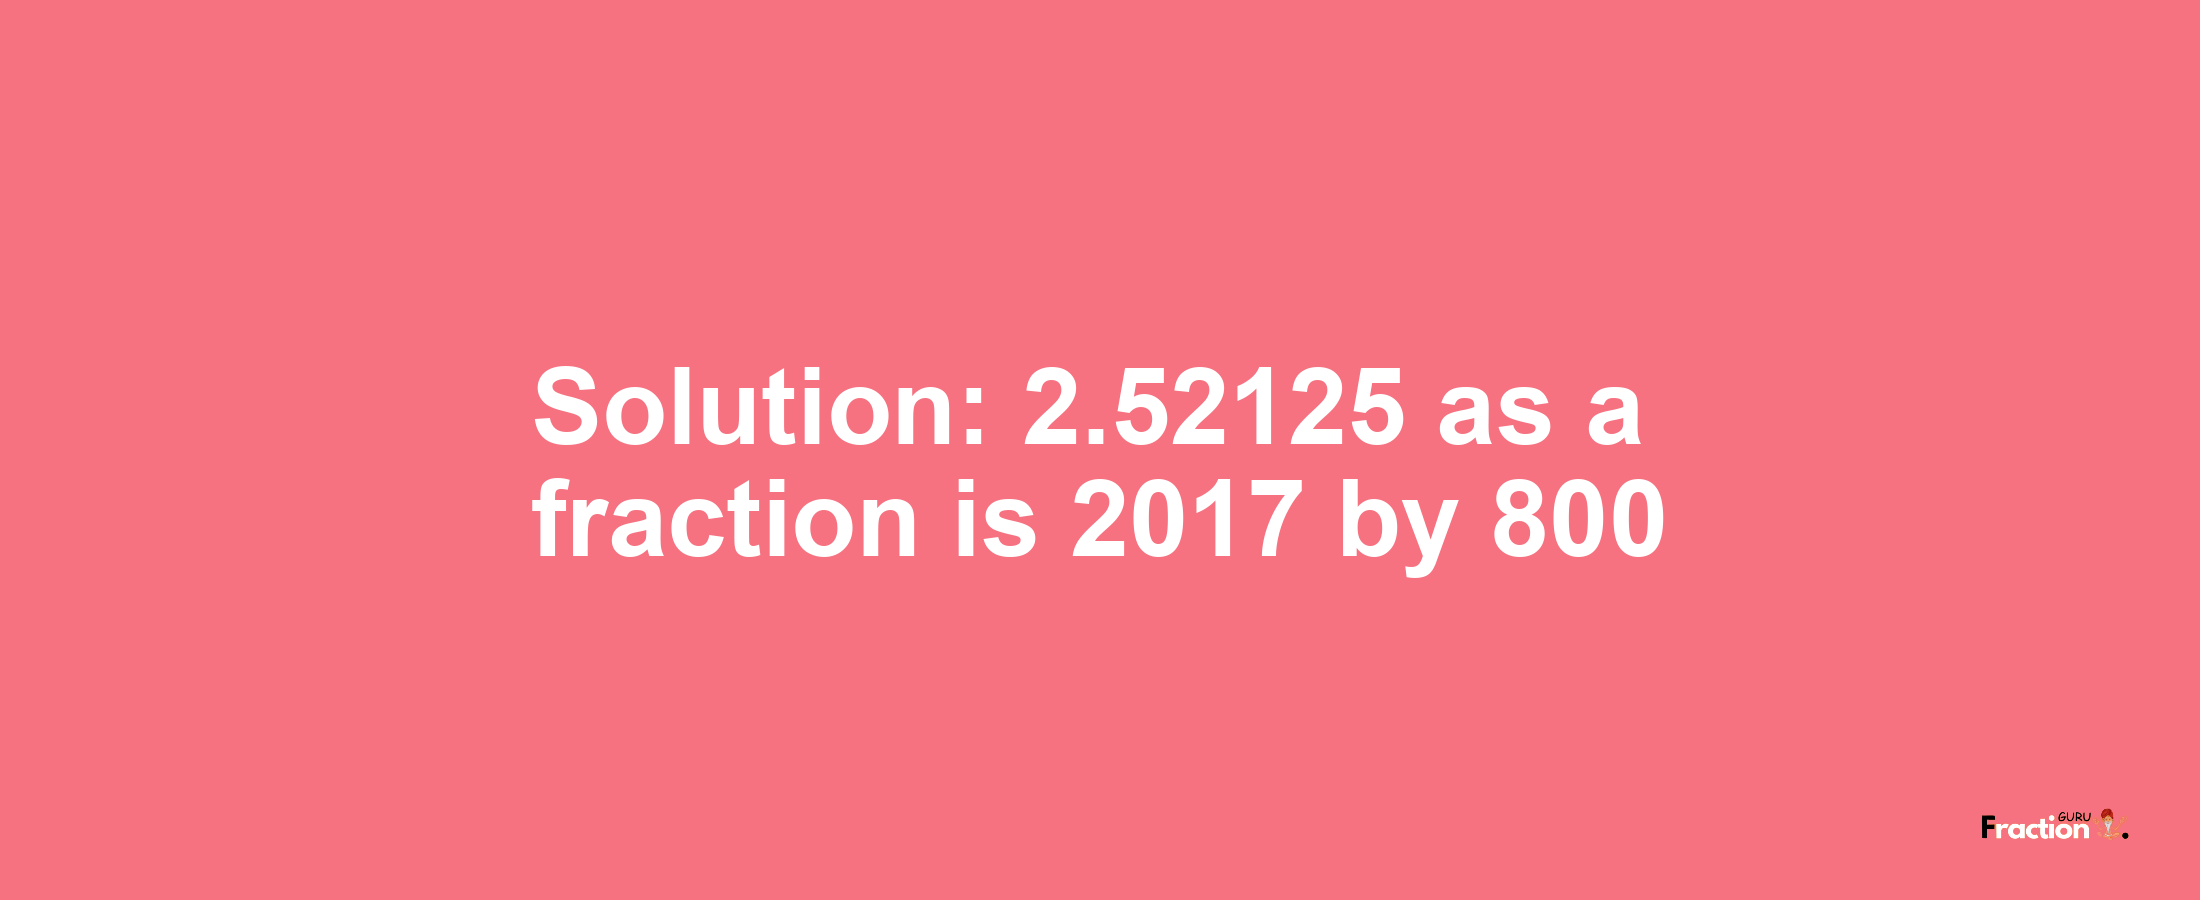 Solution:2.52125 as a fraction is 2017/800